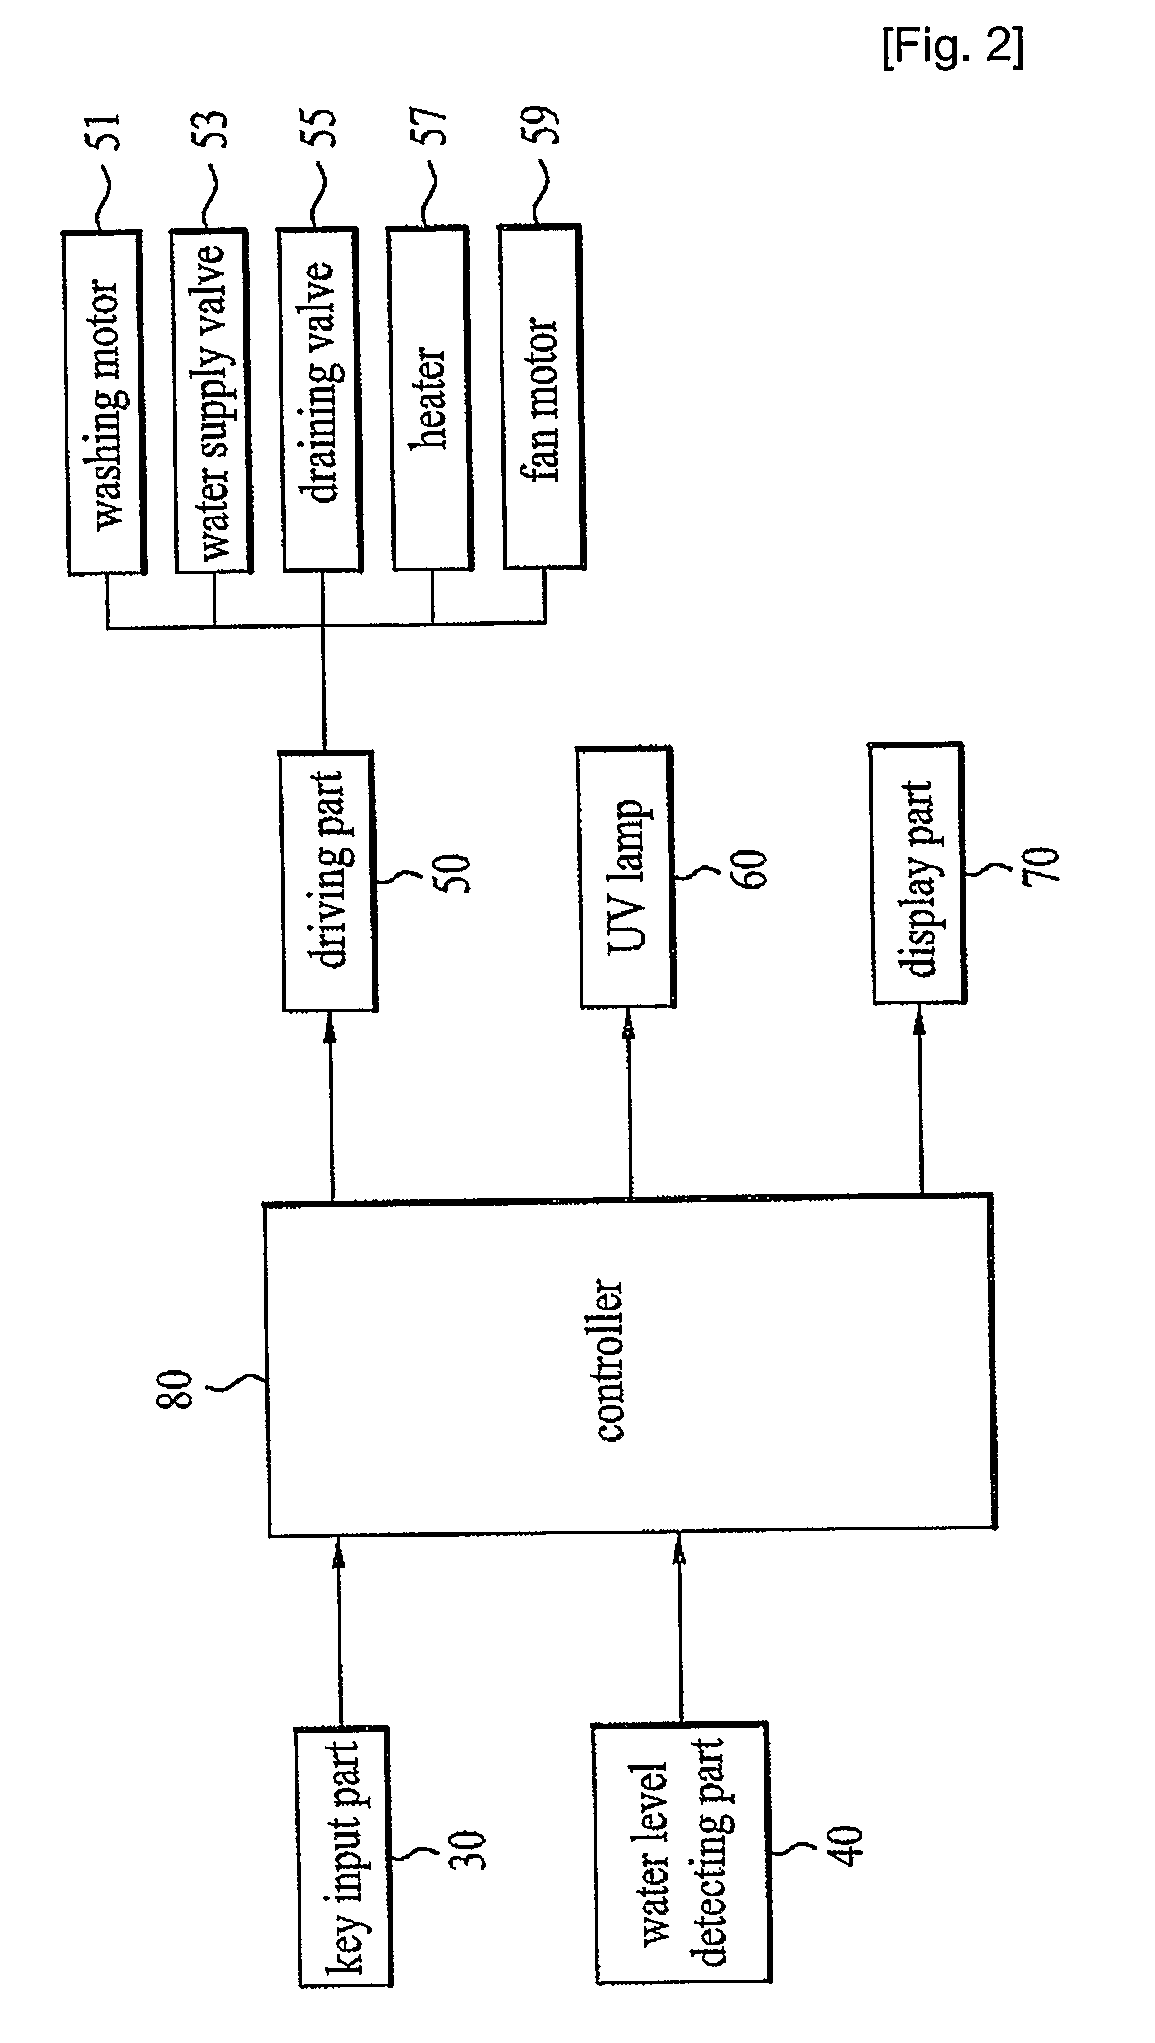 Dish washer with UV sterilization device therein